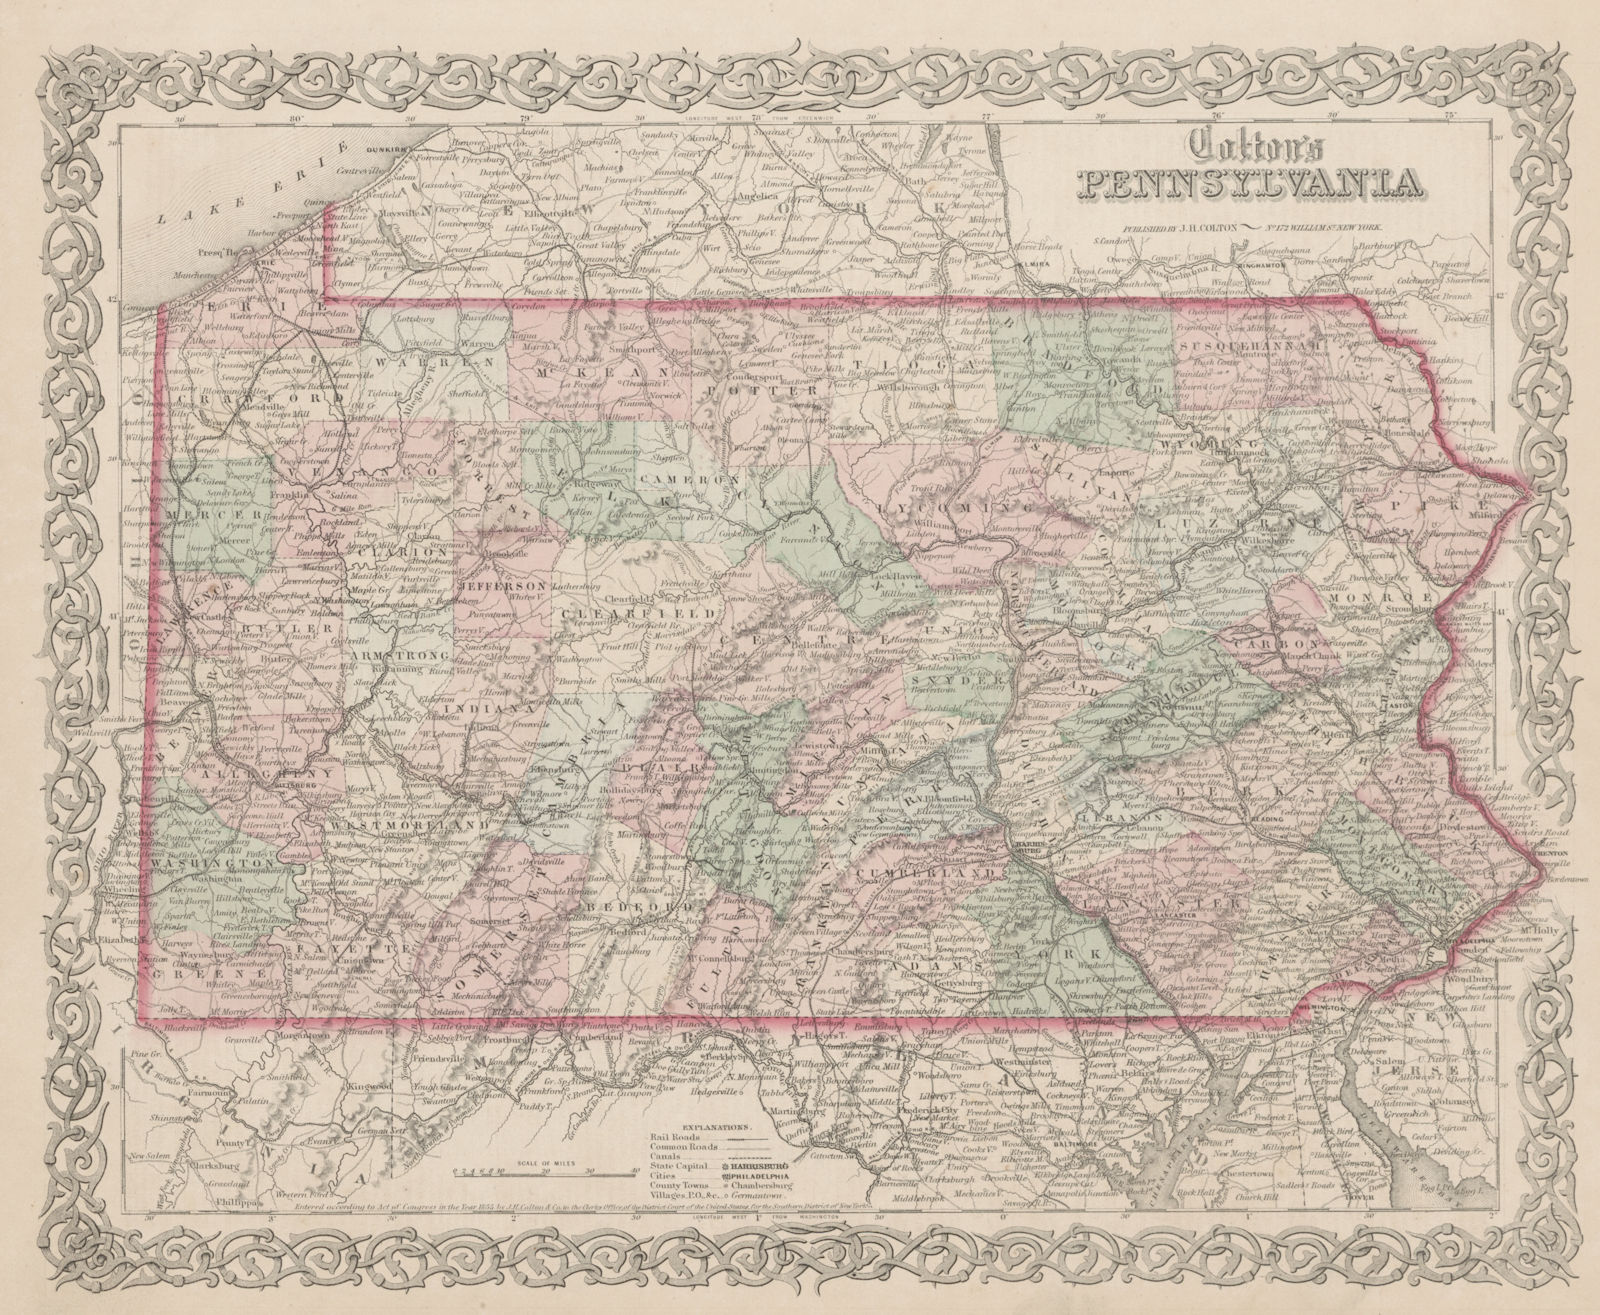 Associate Product "Colton's Pennsylvania". Decorative antique US state map 1863 old